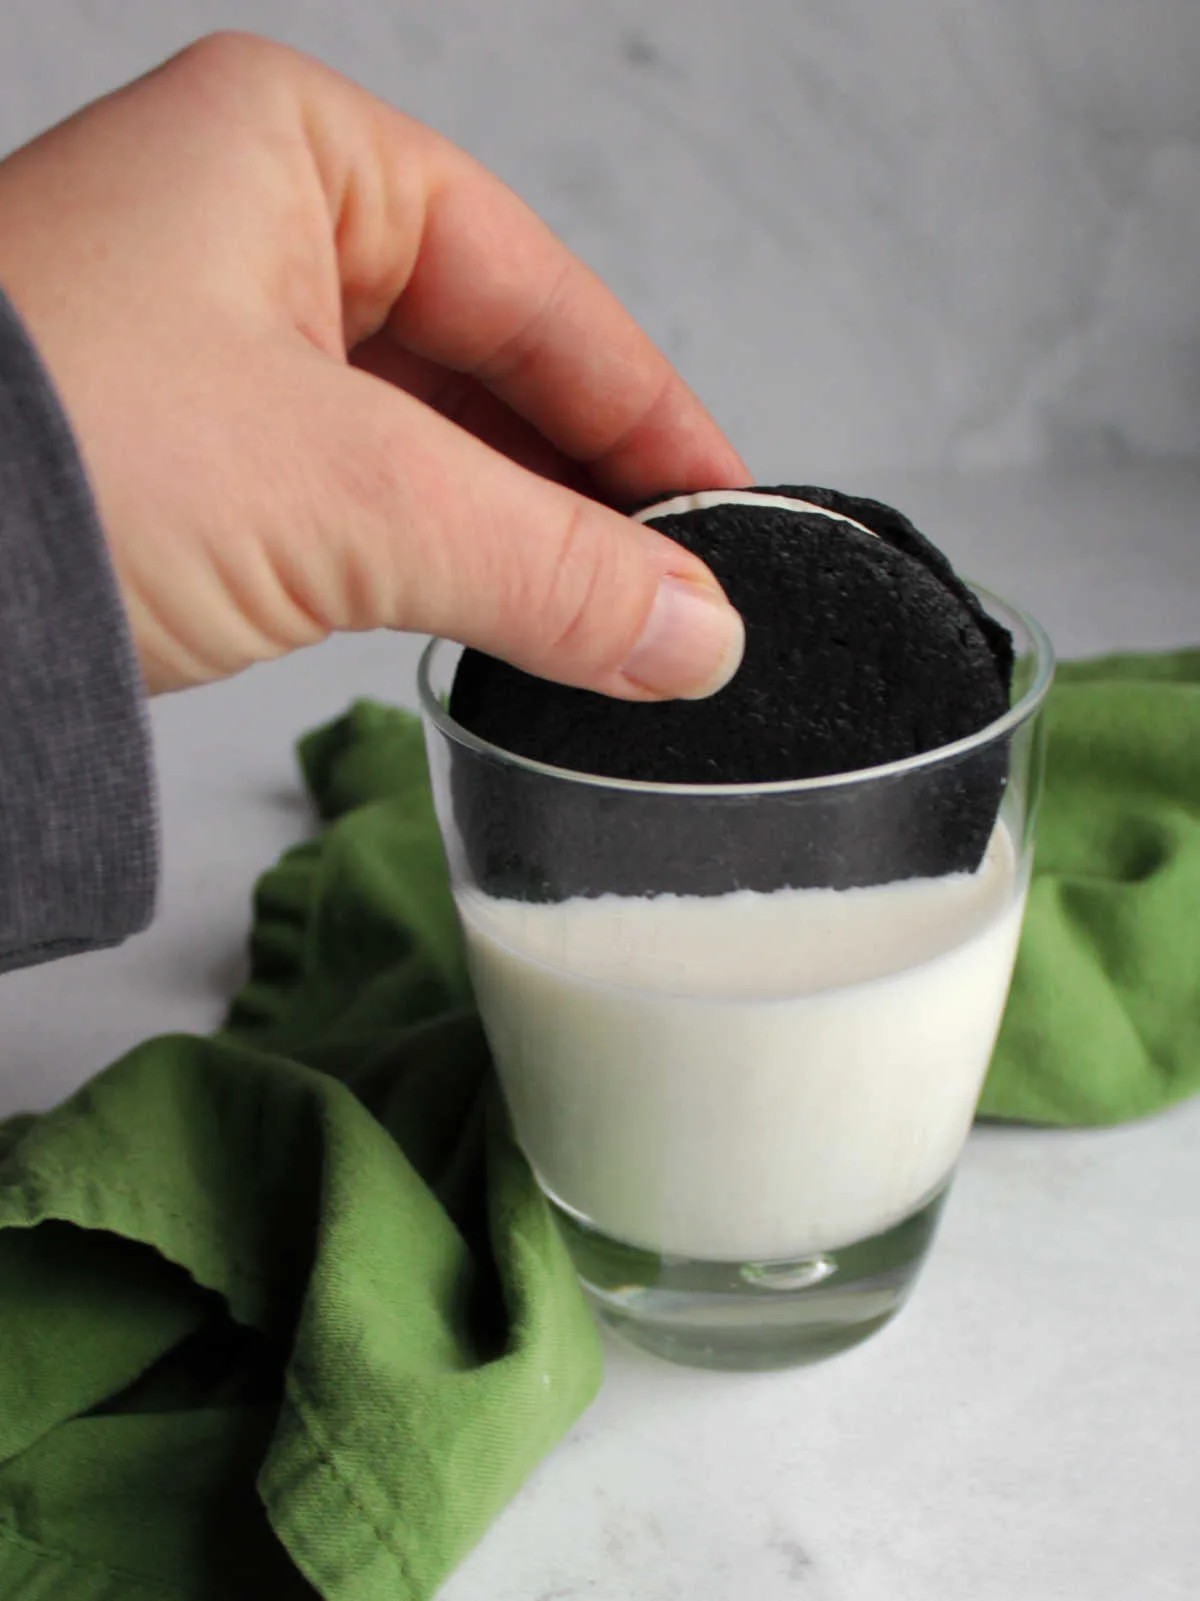 Hand holding homemade oreo cookie submerged in glass of milk. 